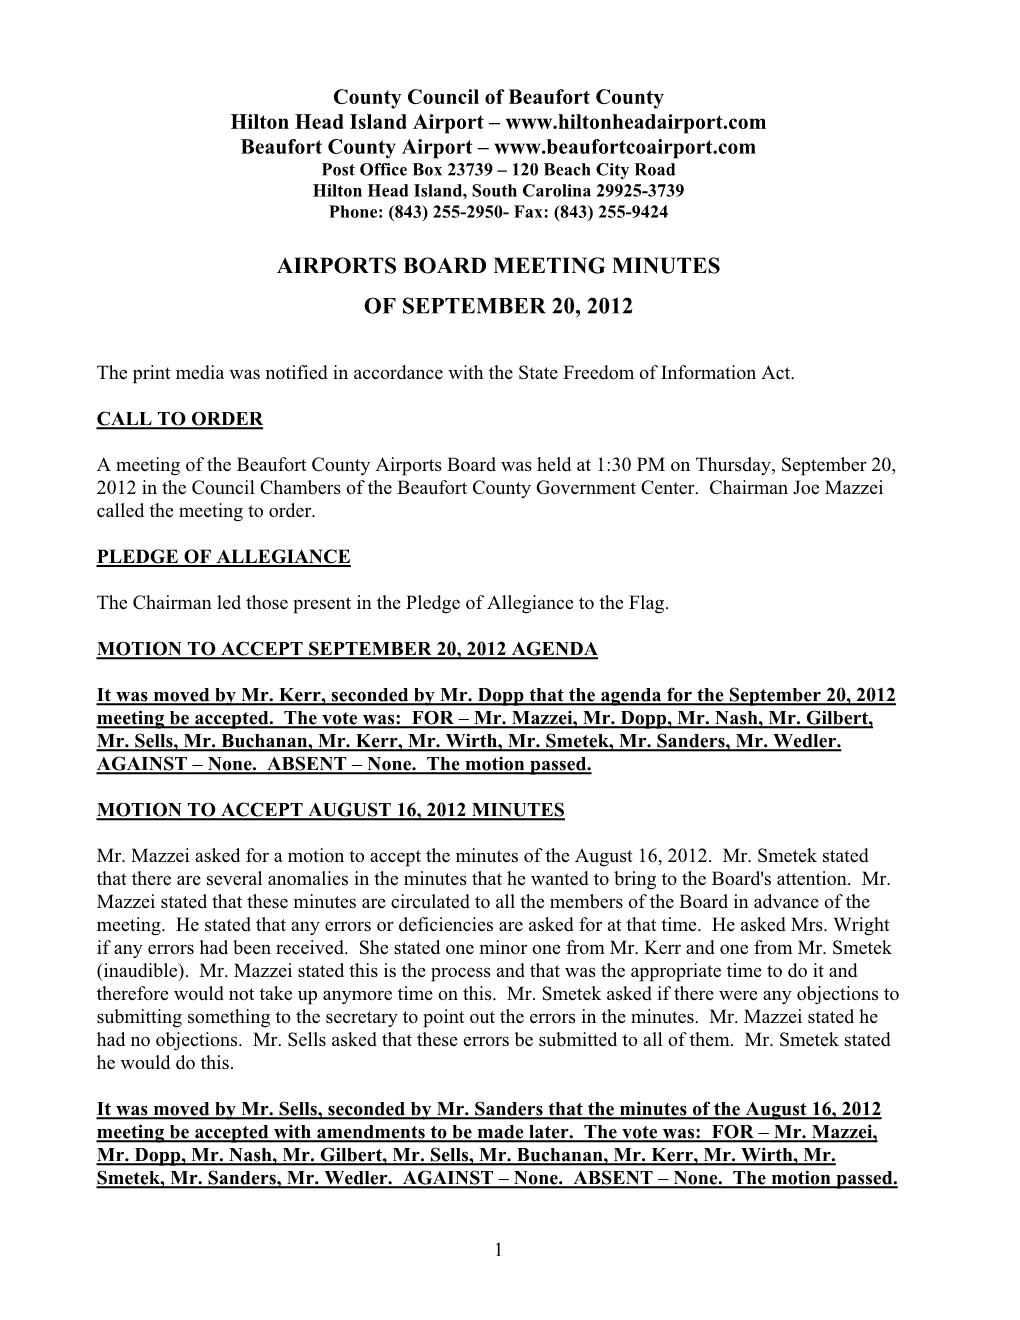 Airports Board Meeting Minutes of September 20, 2012